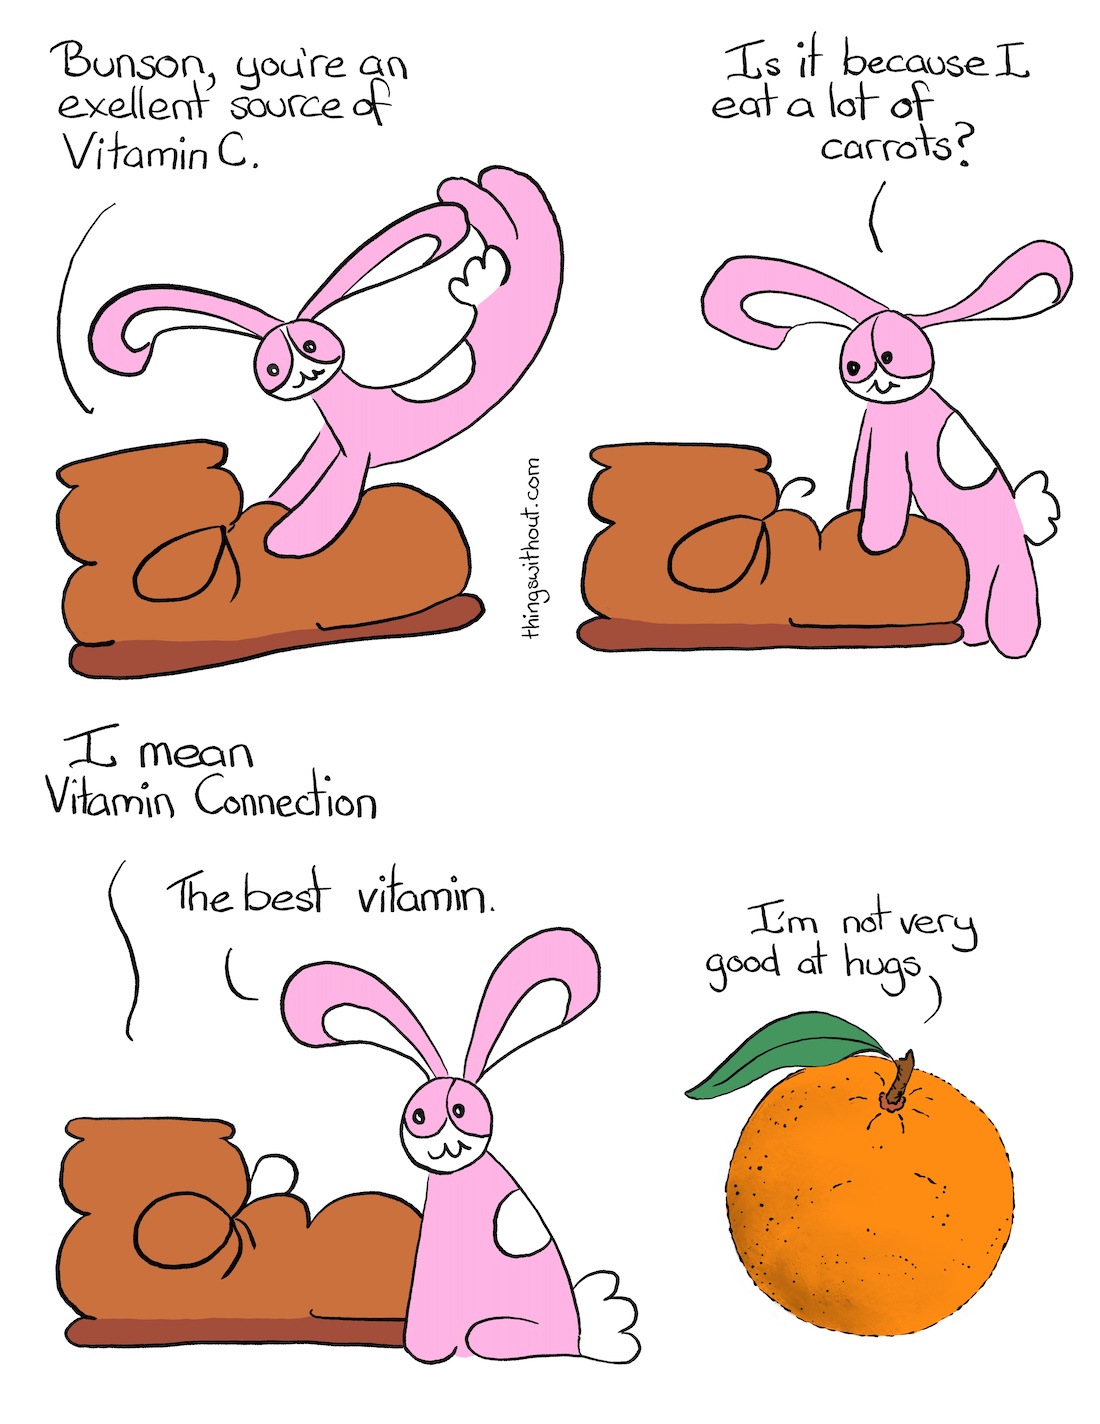 Vitamin Connection Comic Transcript Boot (a brown boot with round laces and curved leather) is being playfully pounced by Bunson Hoppydew (a pink bunny, he likes dancing friendship and cake). Boot: Bunson, you're an excellent source of Vitamin C. Bunson: Is it because I eat a lot of carrots? Boot: I mean Vitamin Connection. Bunson: The best vitamin. We see an orange with a single leaf attached to the stem. Orange: I'm not very good at hugs.